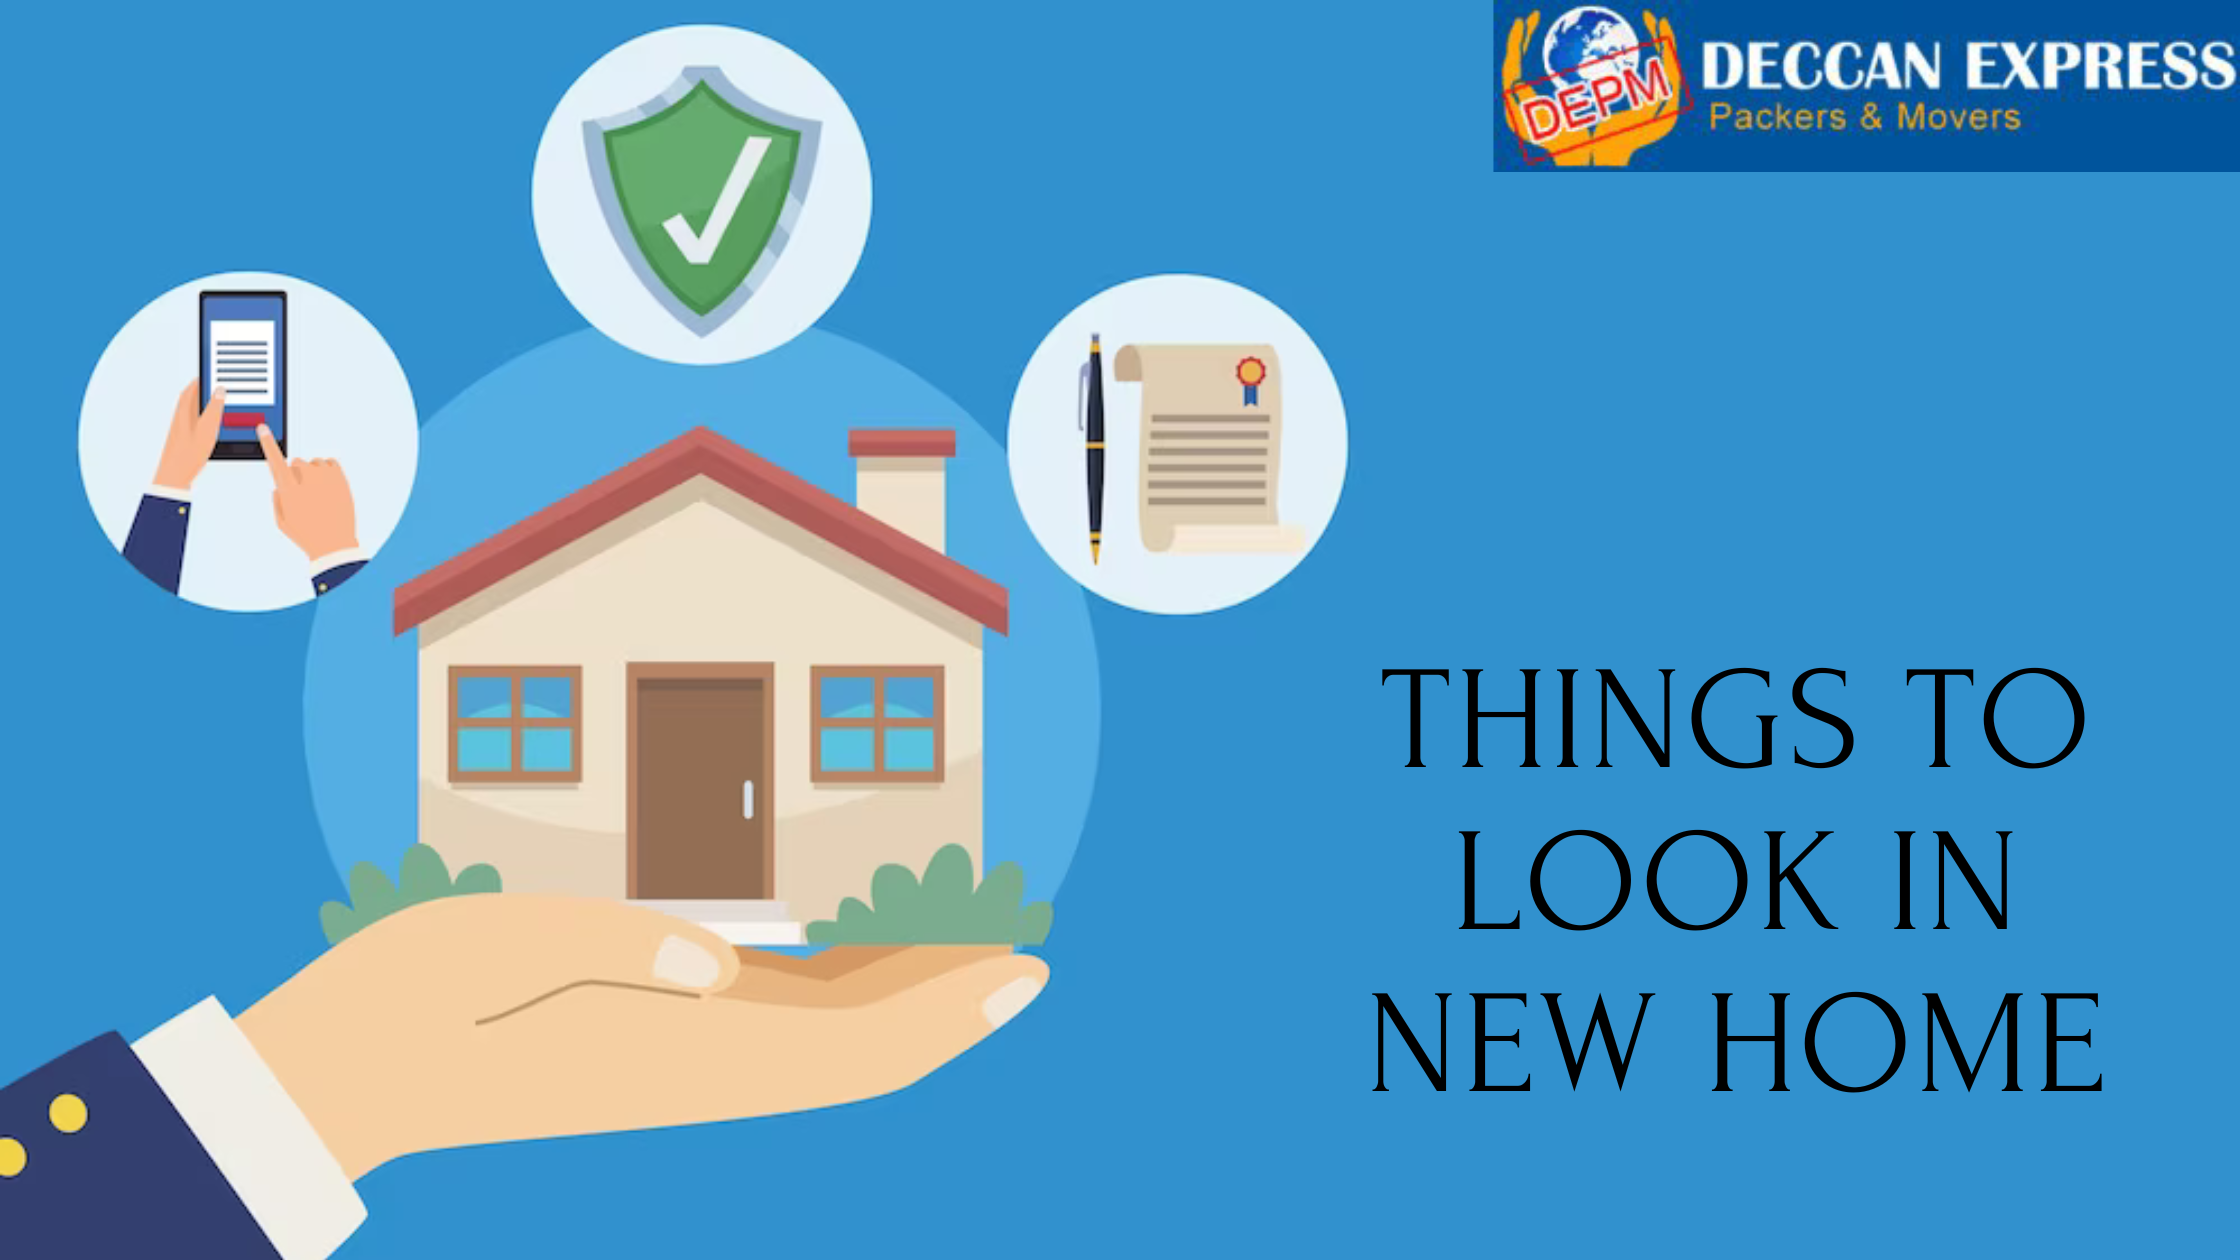 Things to Look for in a New Home